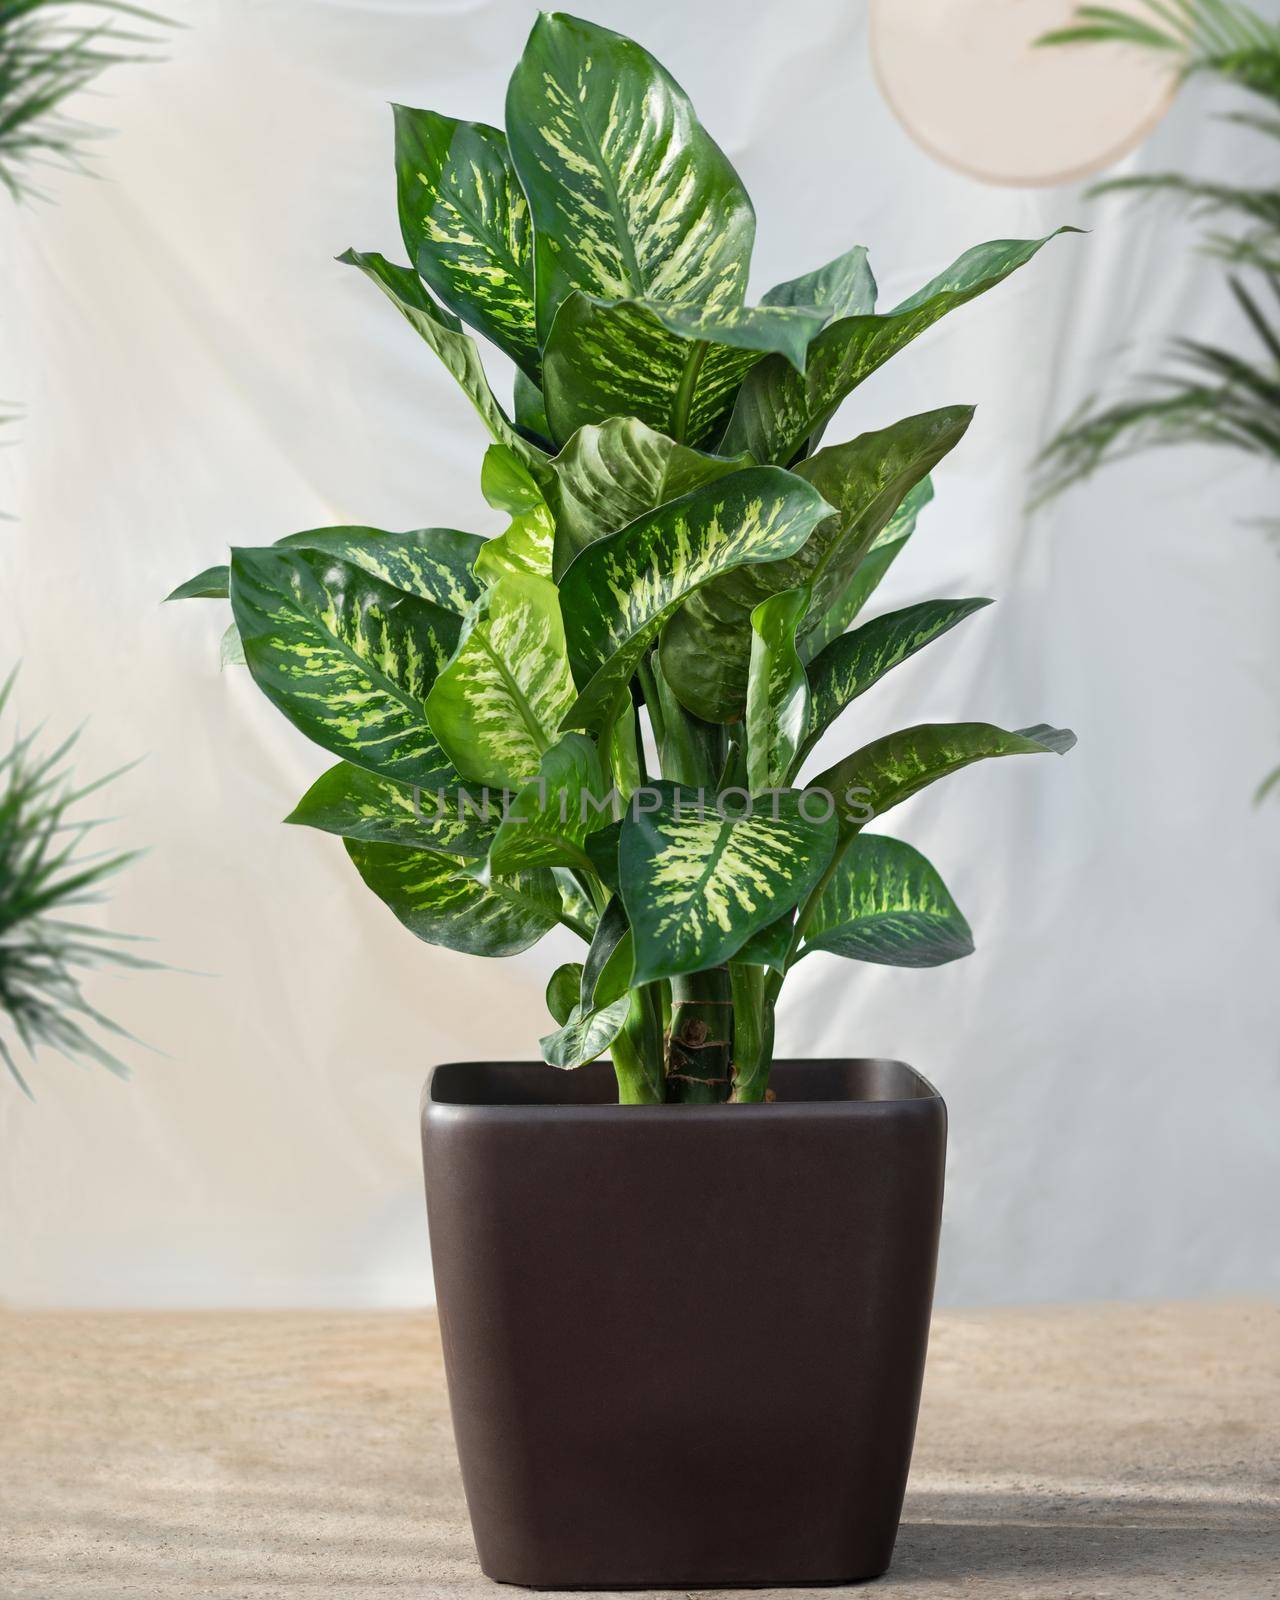 Dieffenbachia Dumb canes plant in the black pot by ferhad